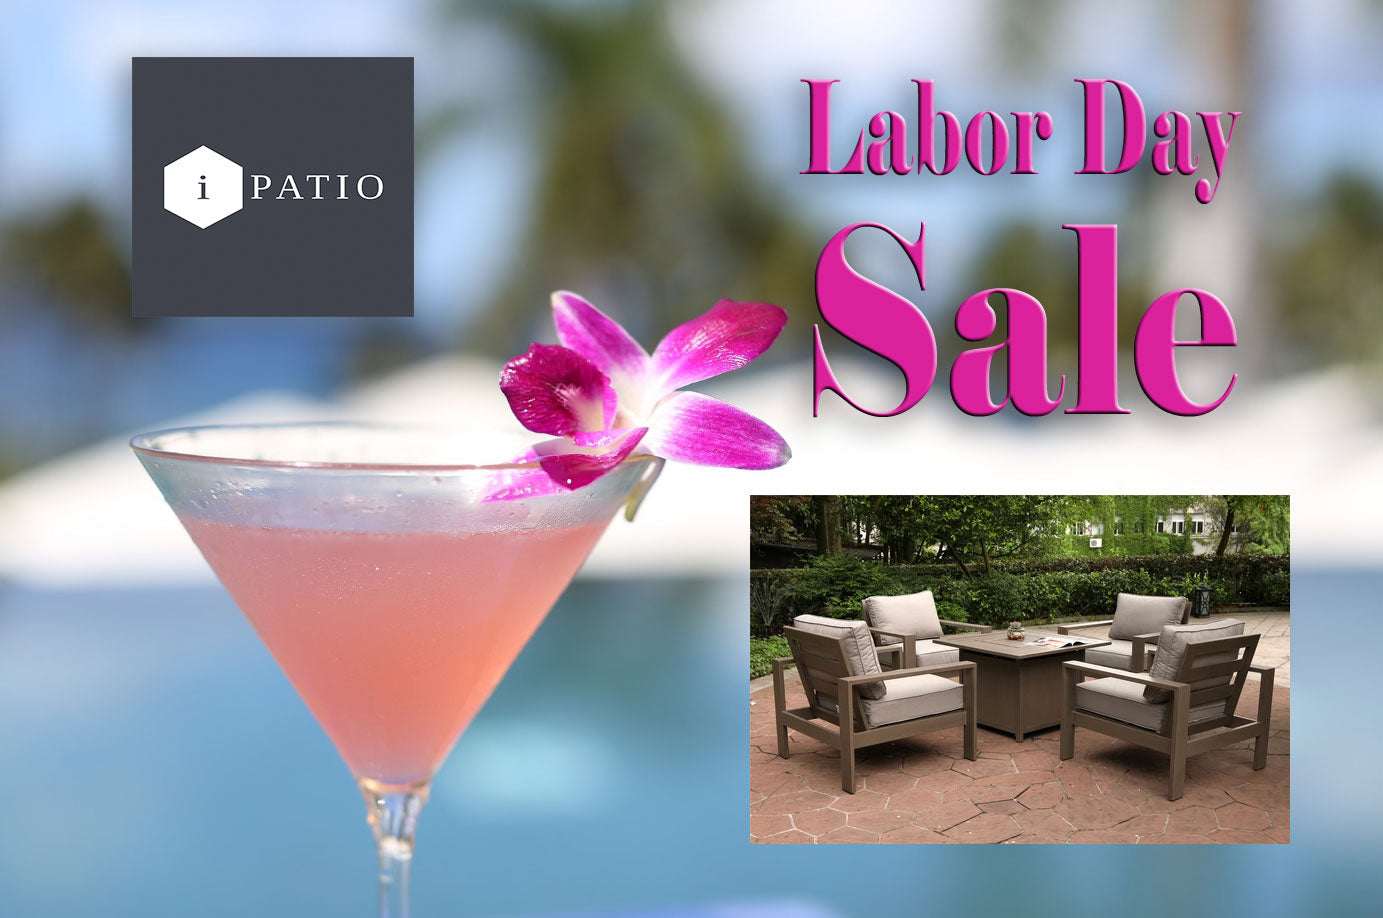 Don't Miss iPatio's Labor Day Sale